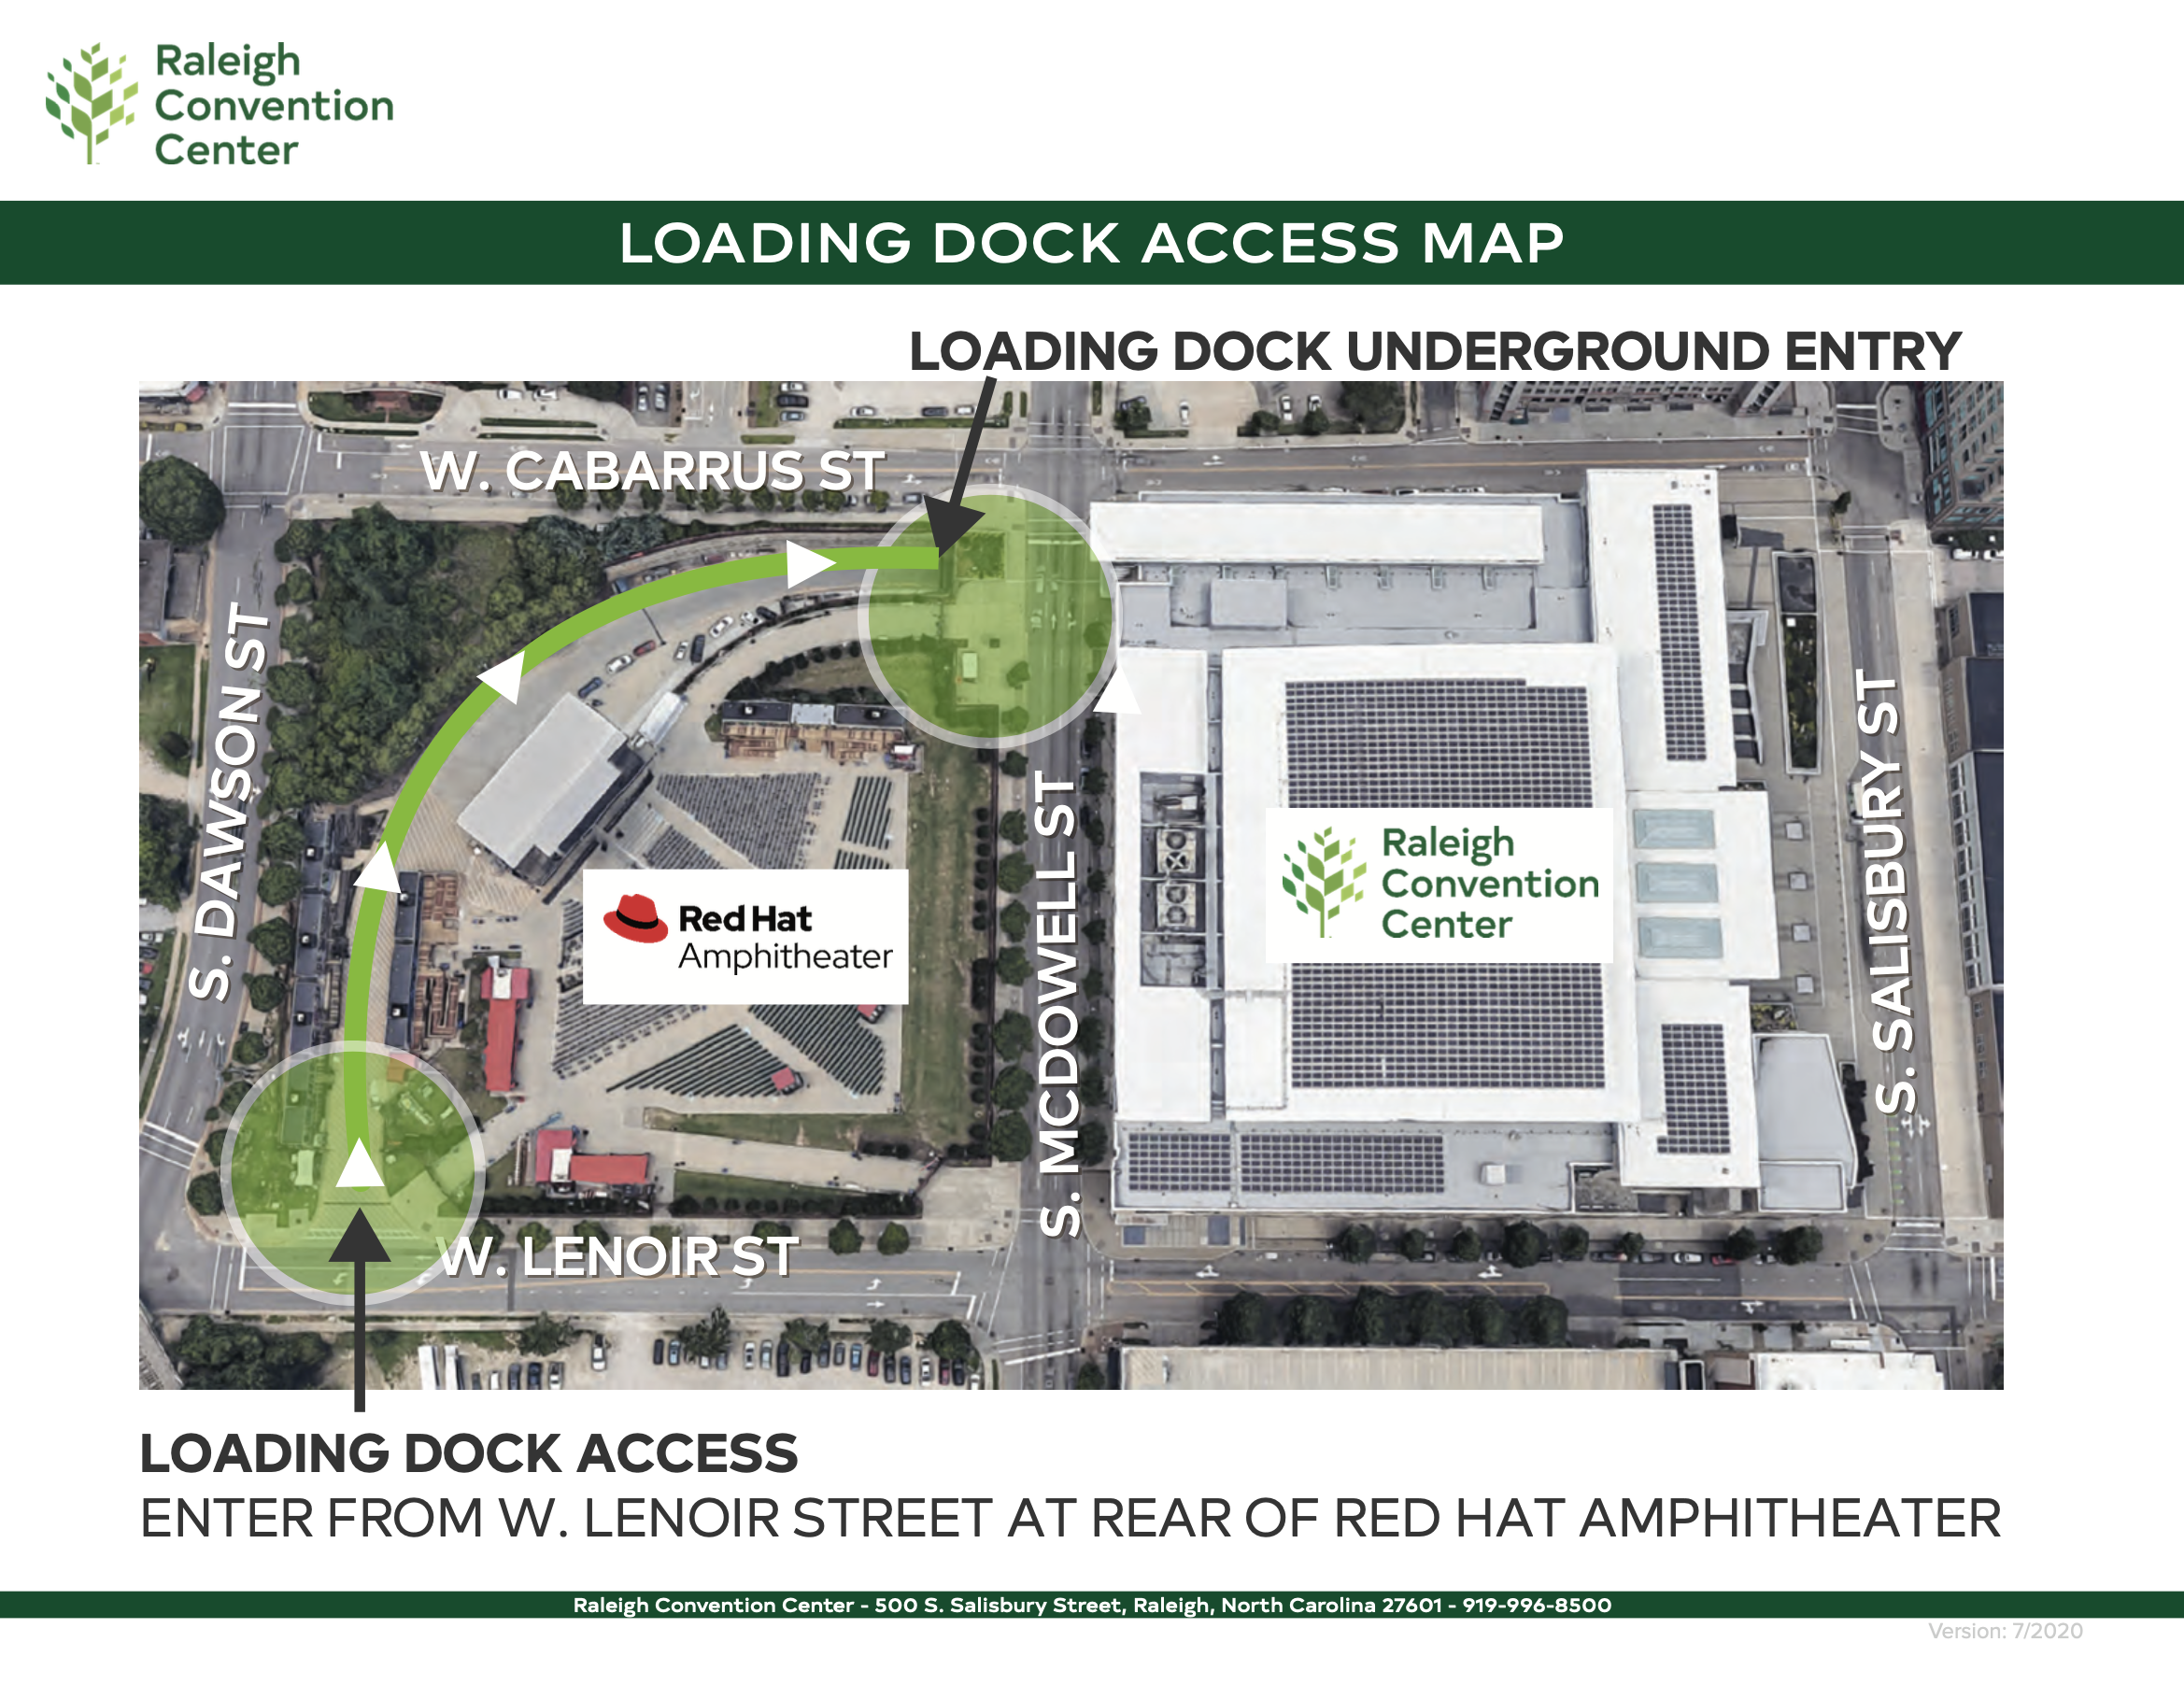 Enter the Loading Dock from W. Lenoir (at S. Dawson)